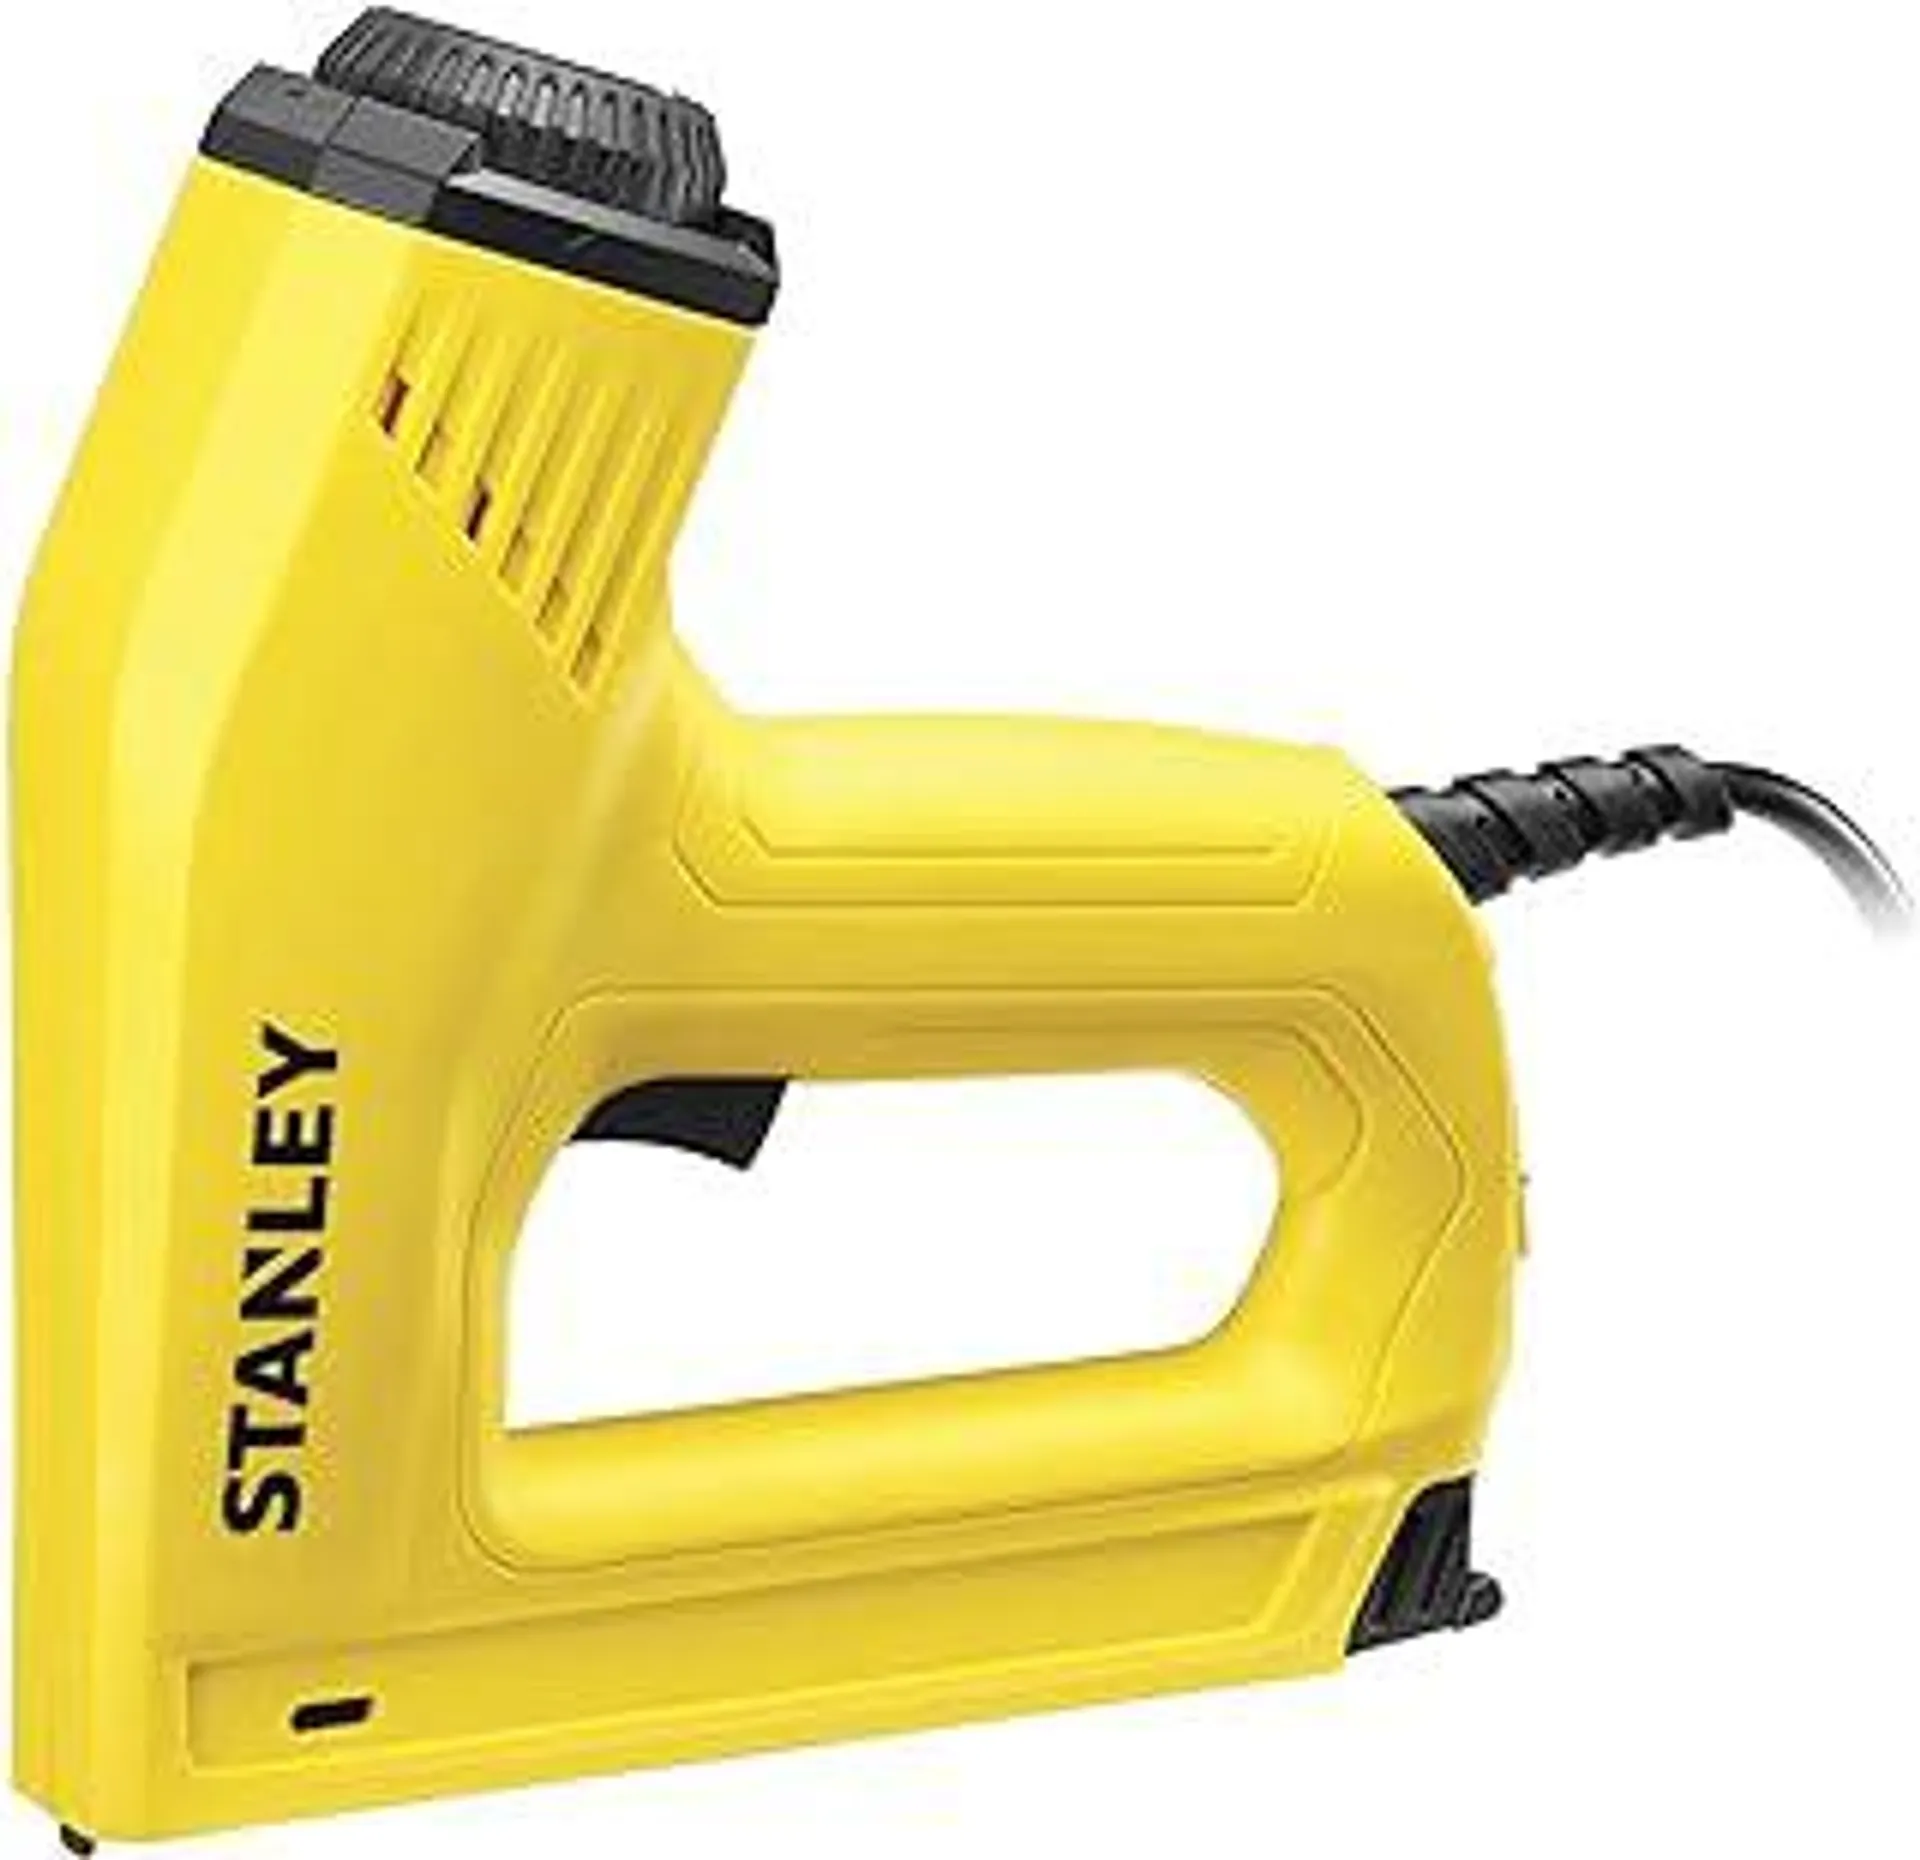 STANLEY Nail Gun, Electric Staple, 1/2-Inch, 9/16-Inch and 5/8-Inch Brads (TRE550Z)